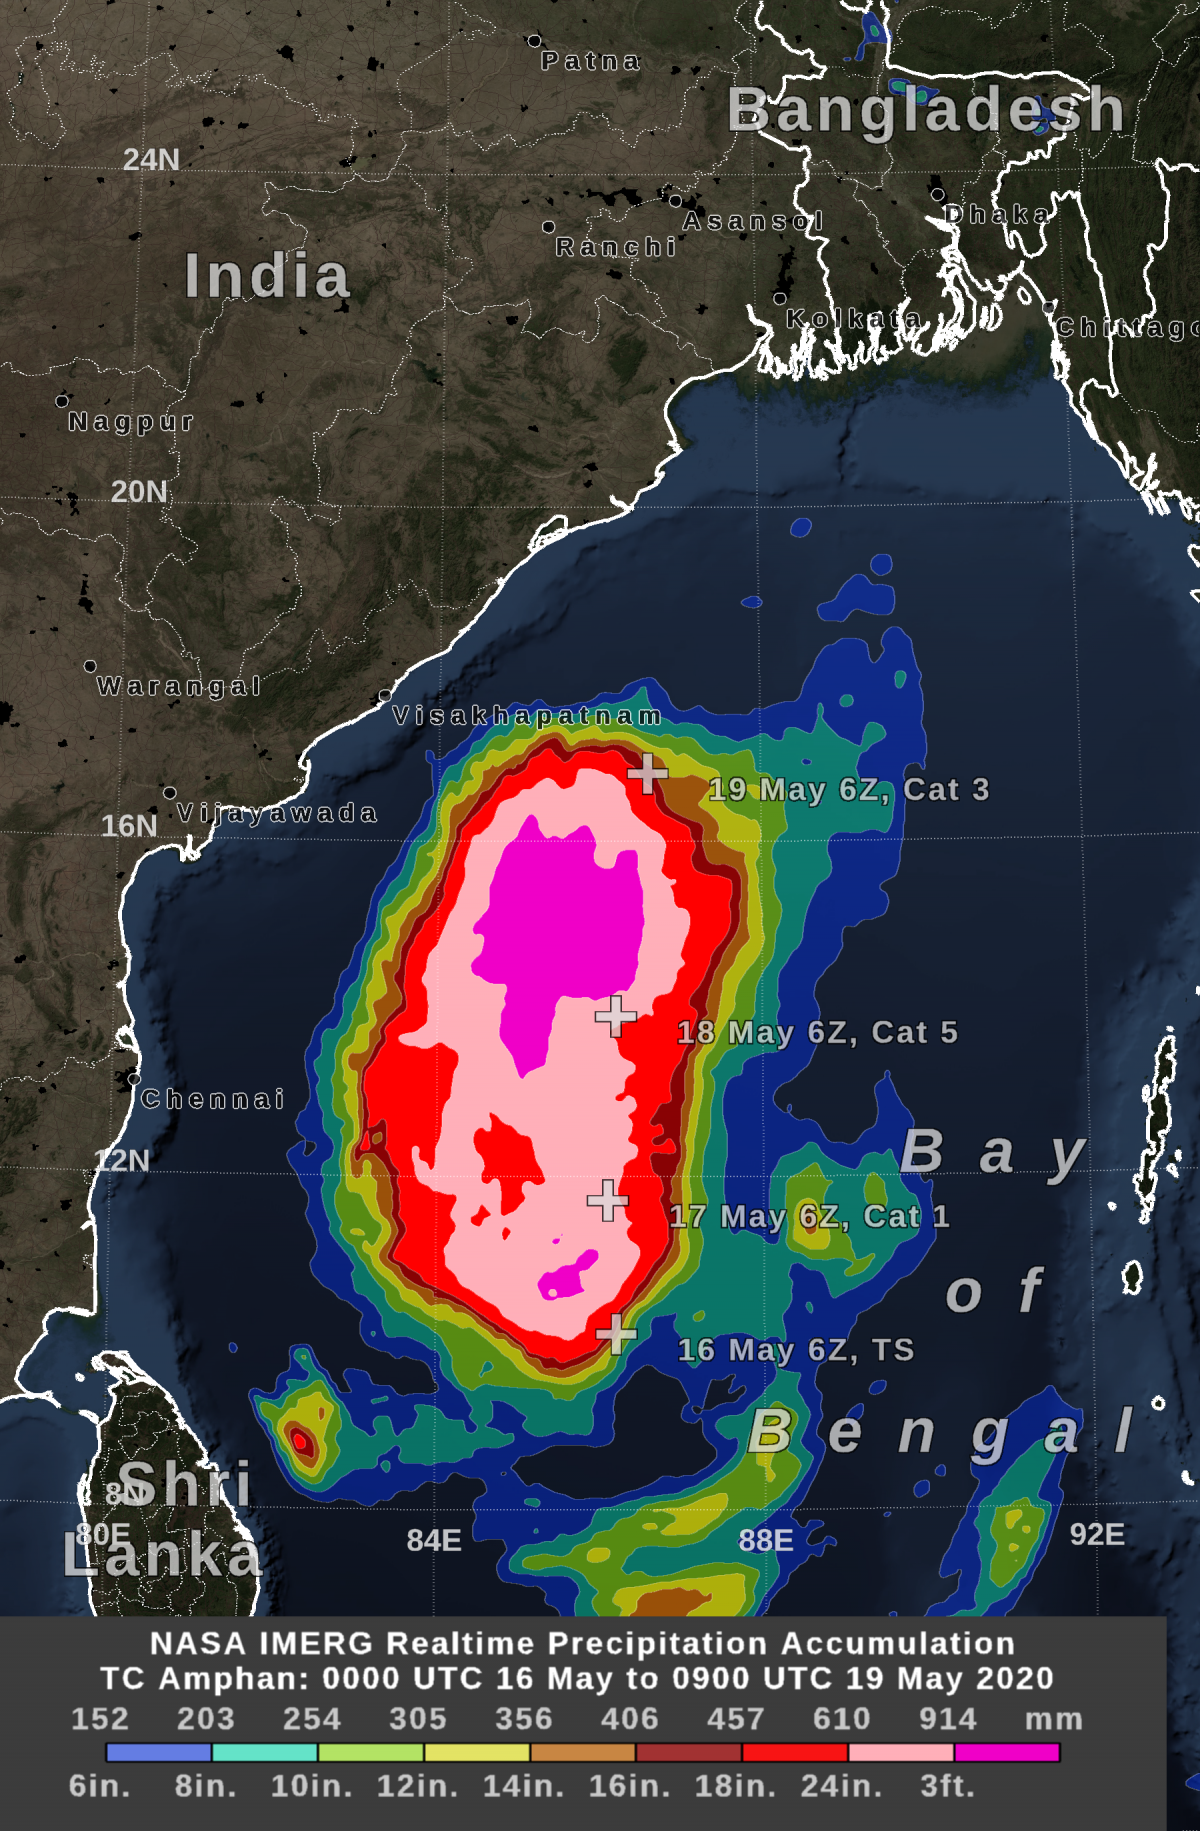 GPM IMERG estimated rainfall totals from Cyclone Amphan from May 16 – 19, 2020.